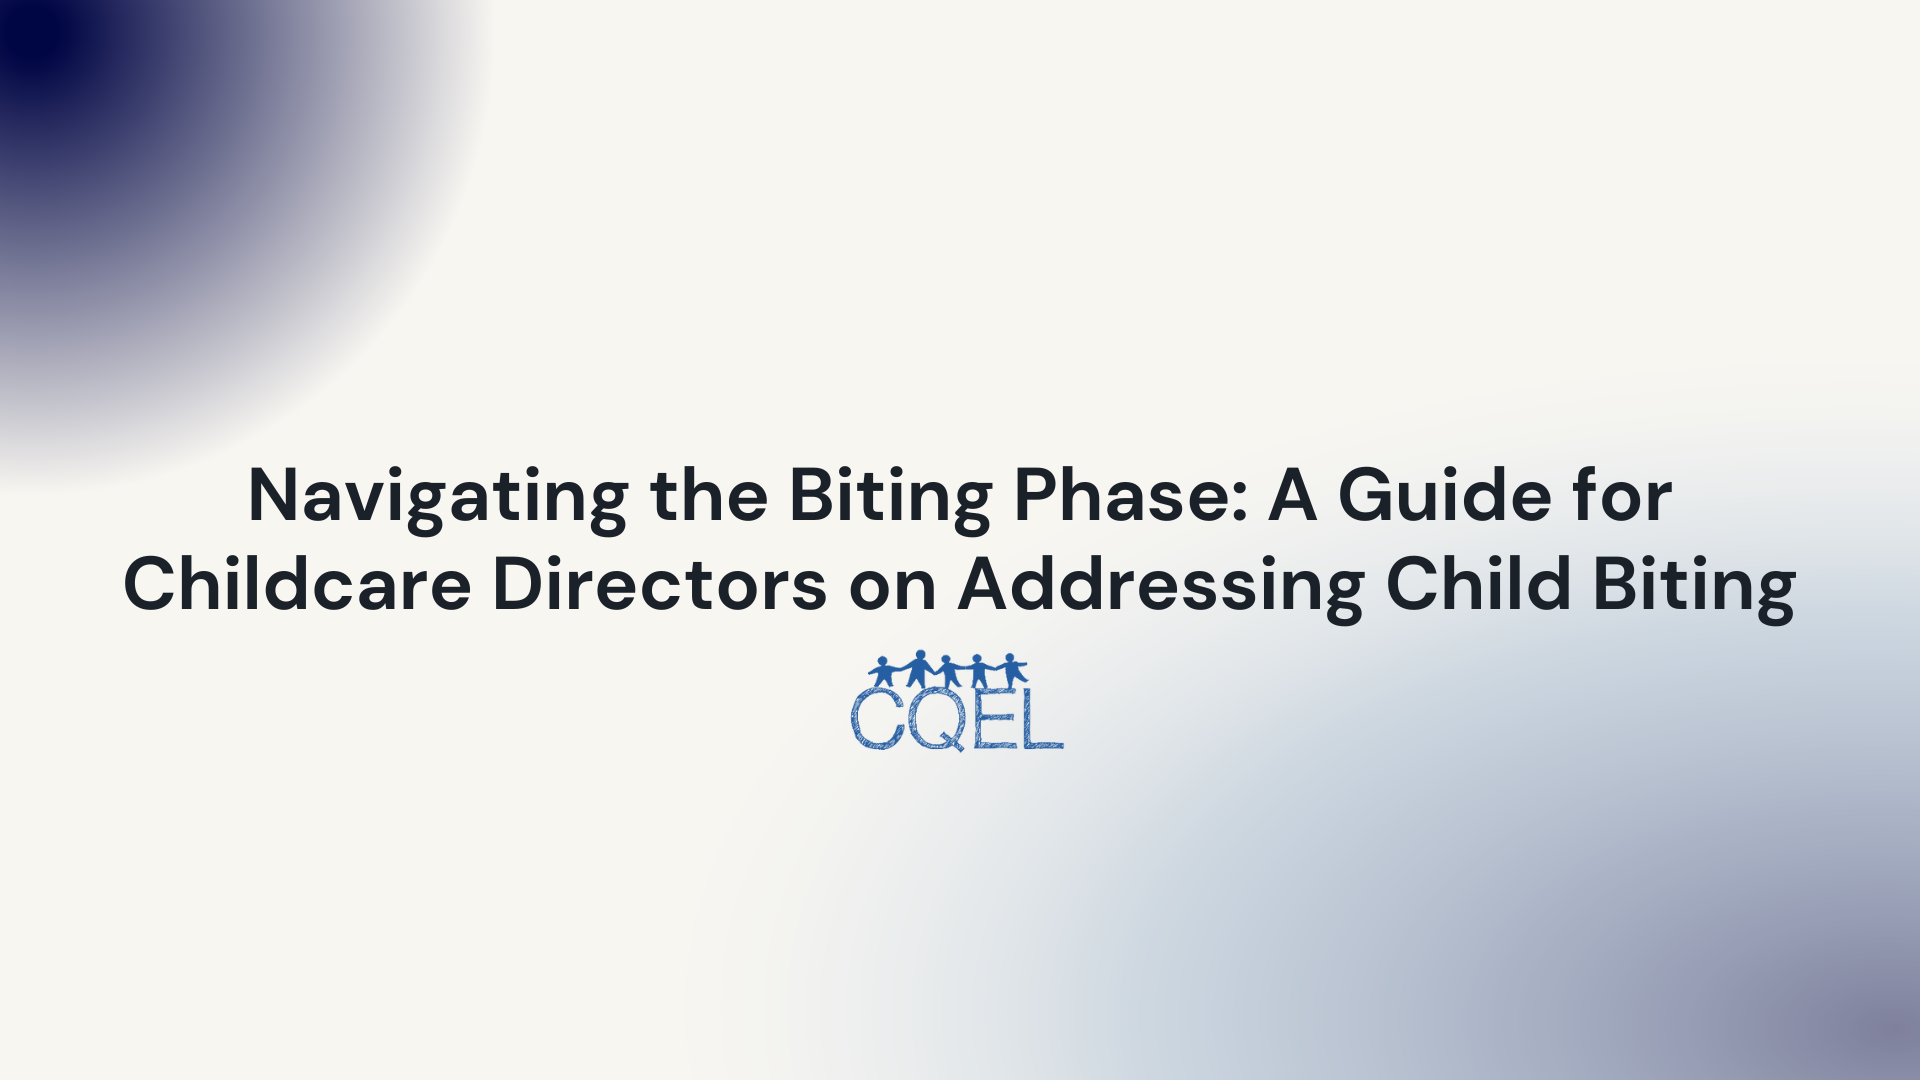 Navigating the Biting Phase: A Guide for Childcare Directors on Addressing Child Biting